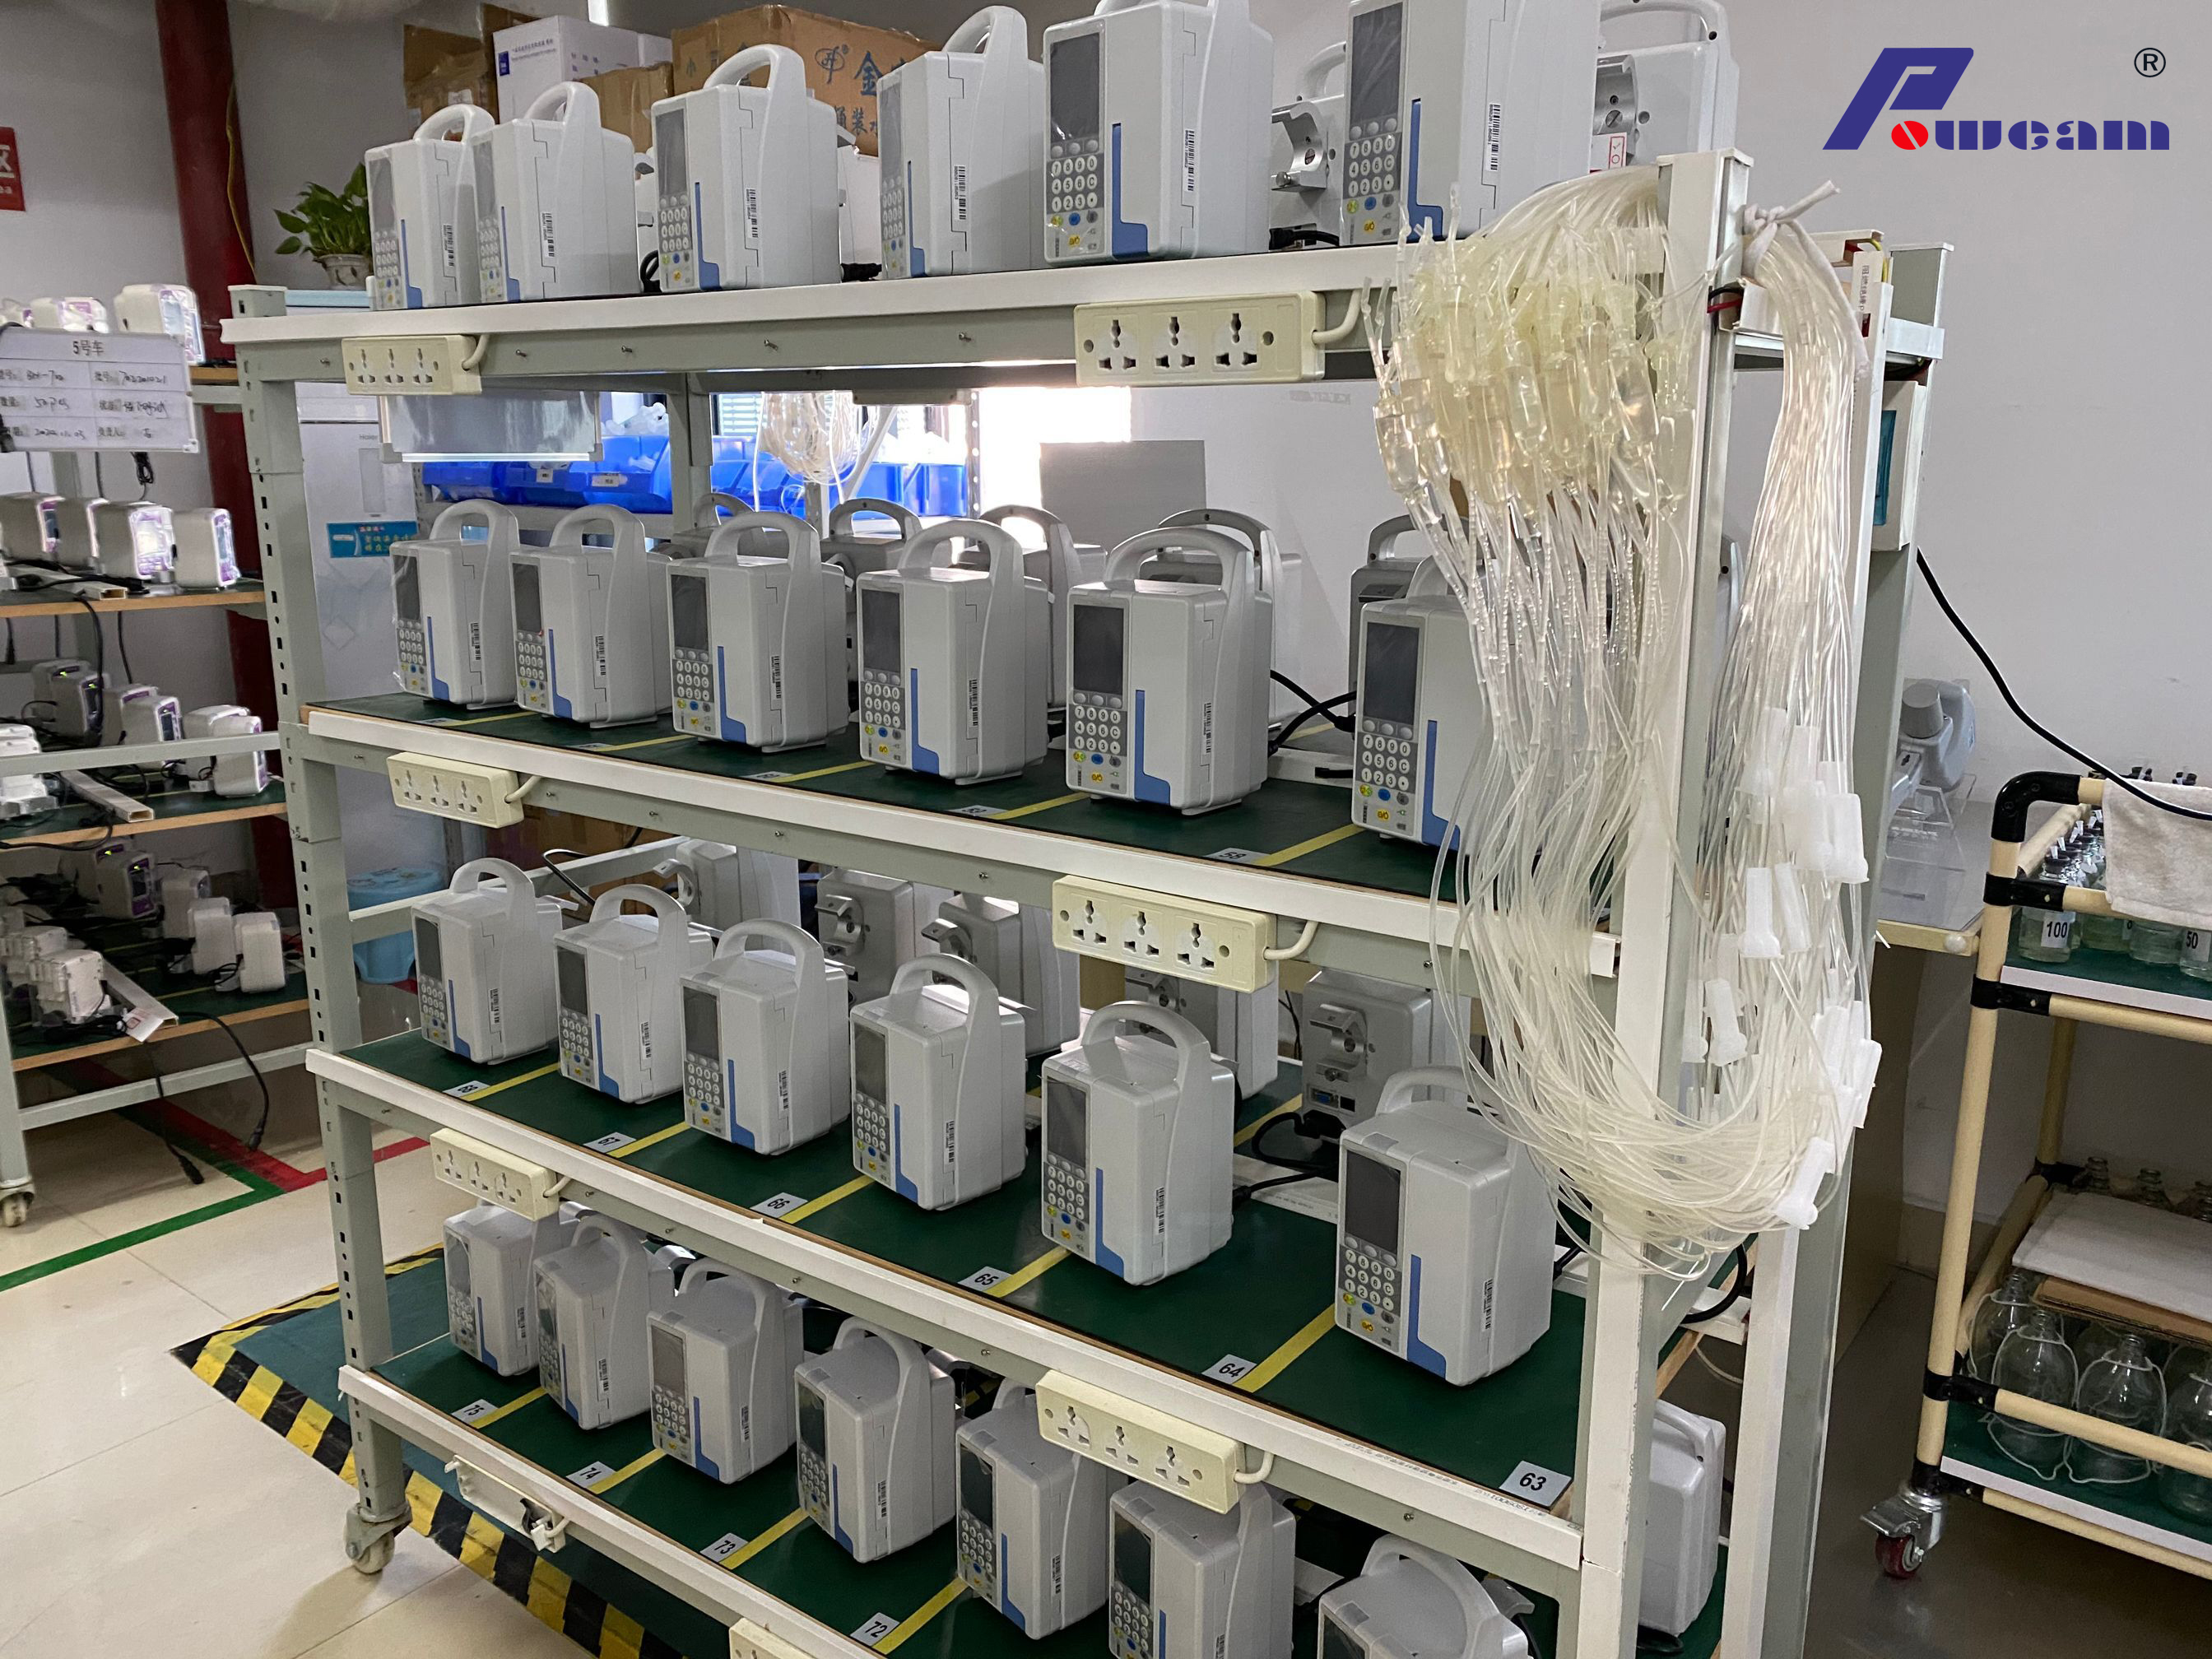 CI-2000B Automatic Volumetric Intravenous Infusion Pump with Drug Library